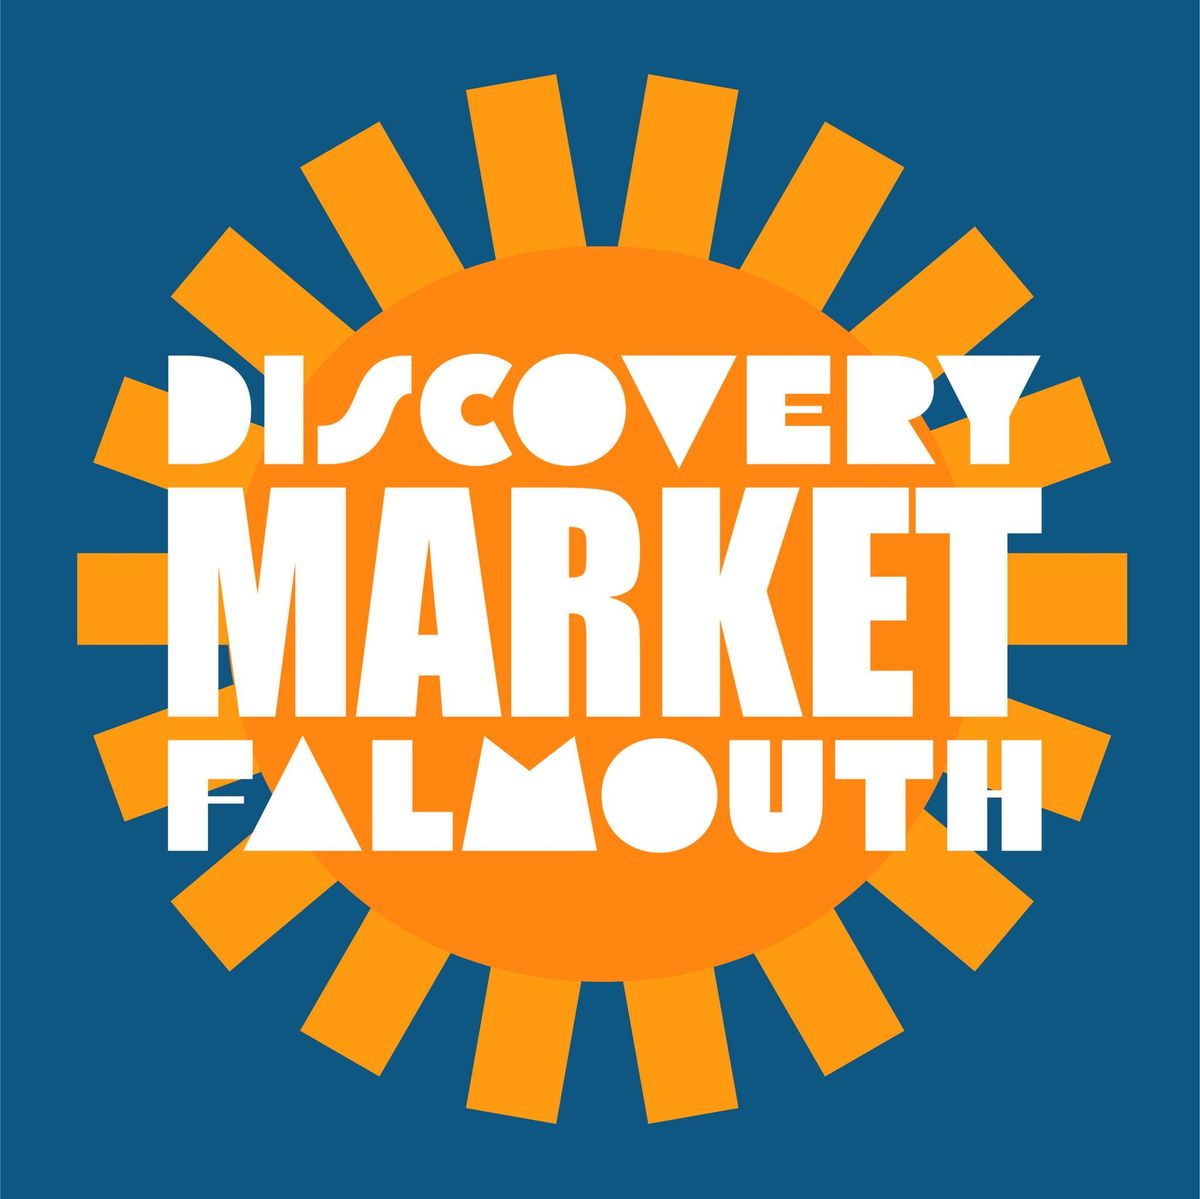 Discovery Market, Event Square, Falmouth